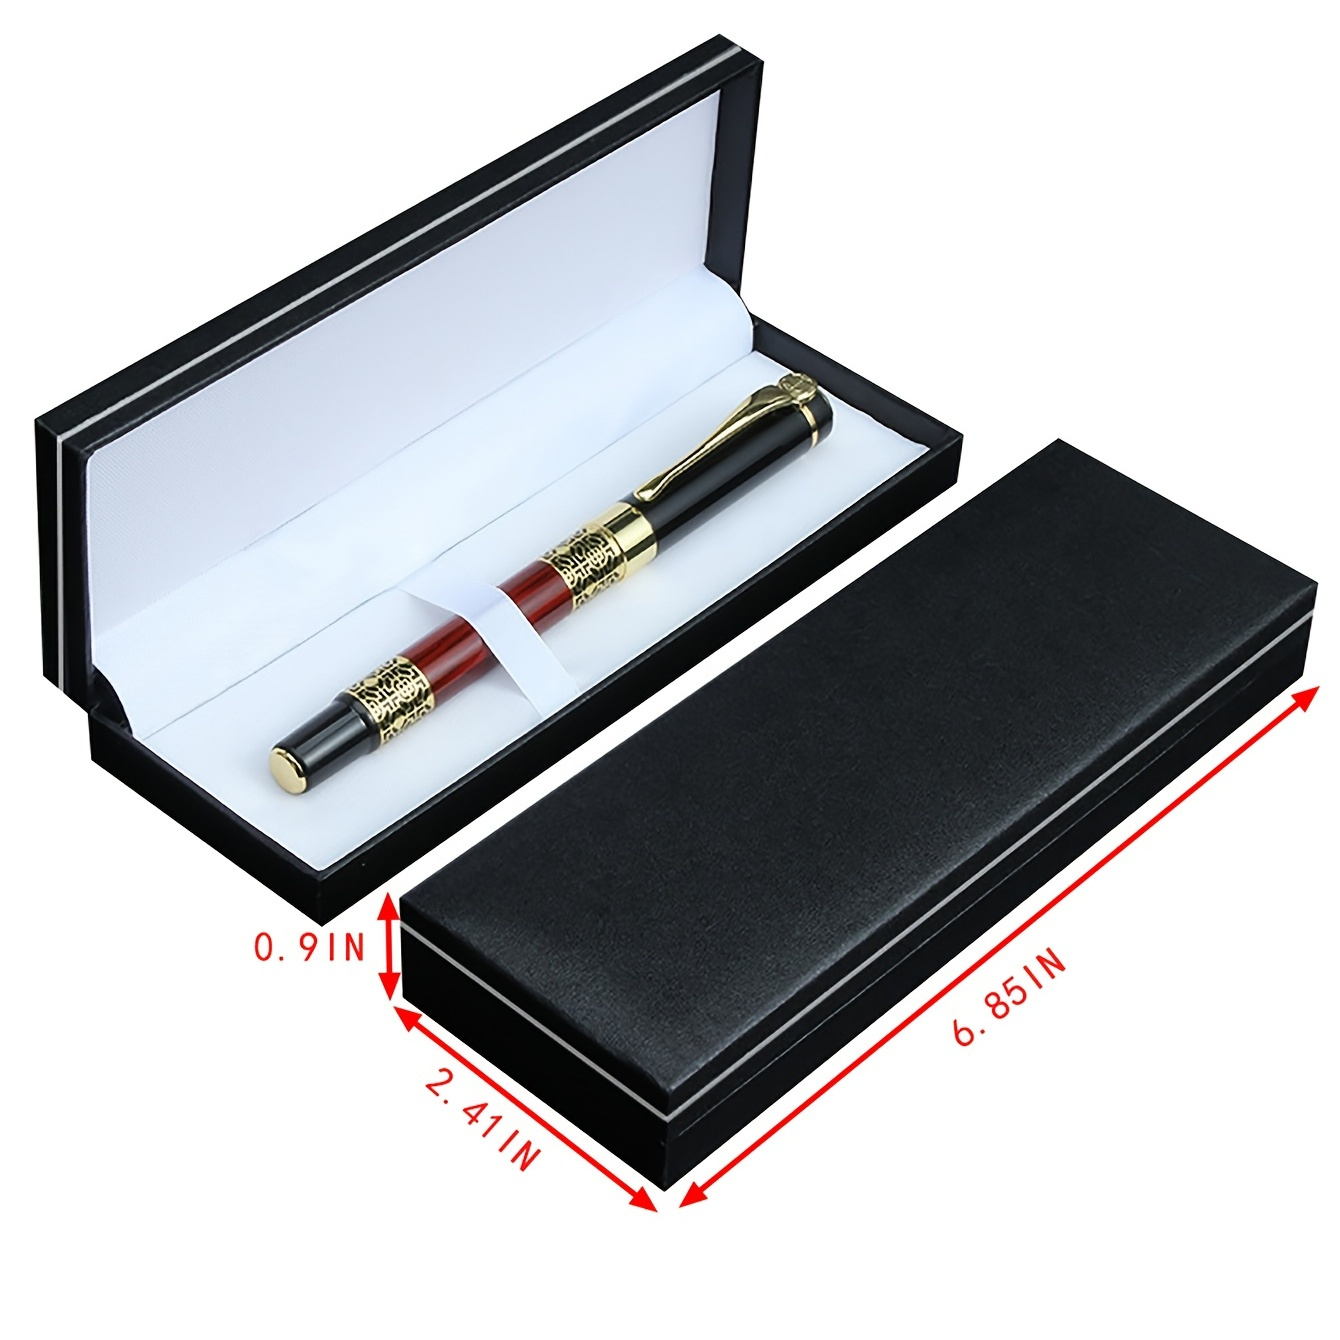 3 Pcs Wooden Pens Set with Pen Gift Case/Best Writing Fountain Pen Fancy Ballpoint Pen and Luxury Gel Pen with Ink Refills Promotional Business